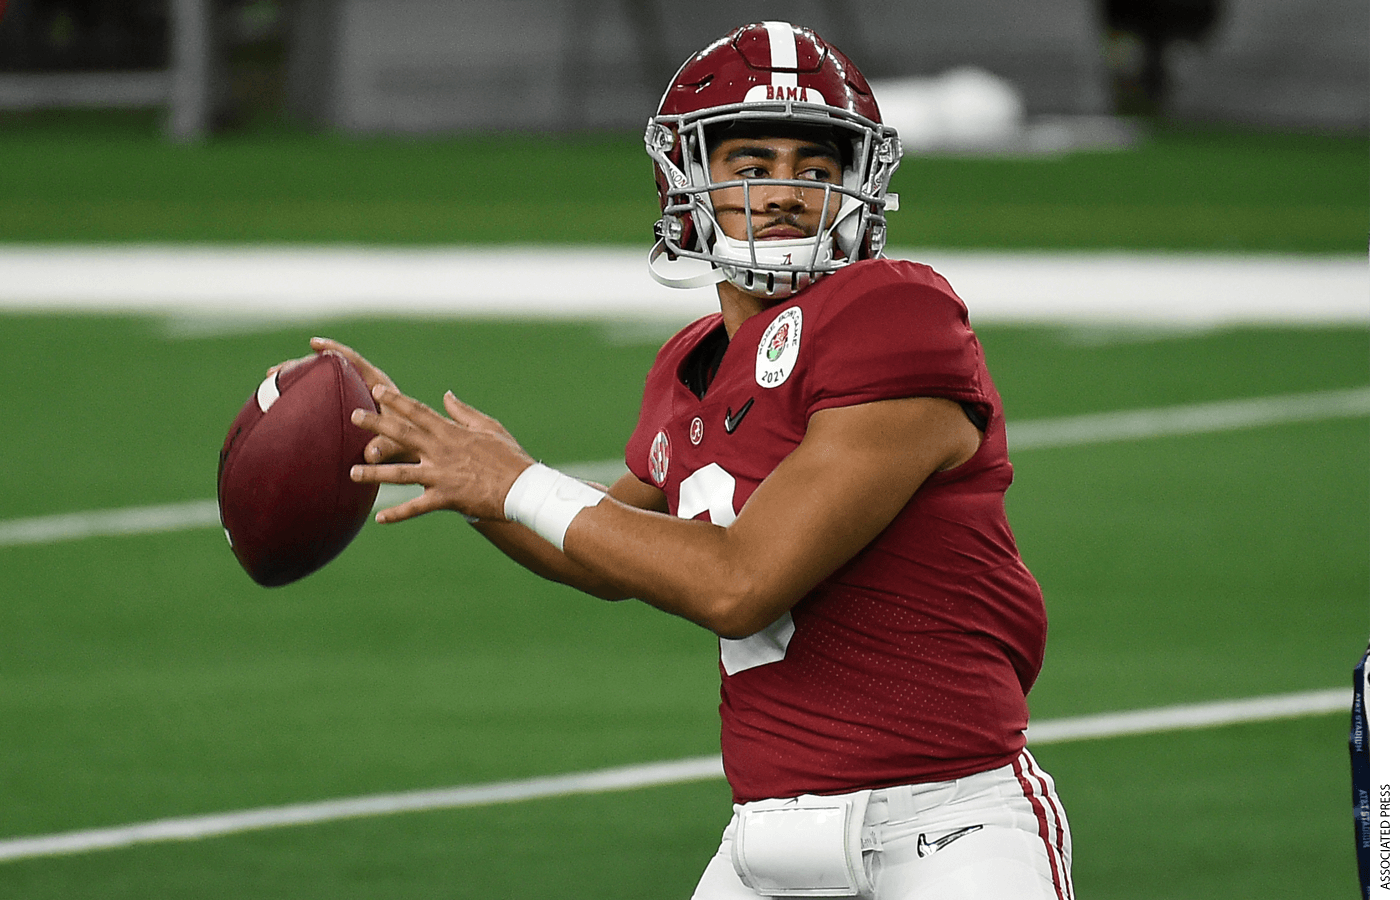 Alabama’s sophomore quarterback Bryce Young has reportedly signed more than $800,000 in NIL deals—sums that his coach, Nick Saban, called “ungodly.”